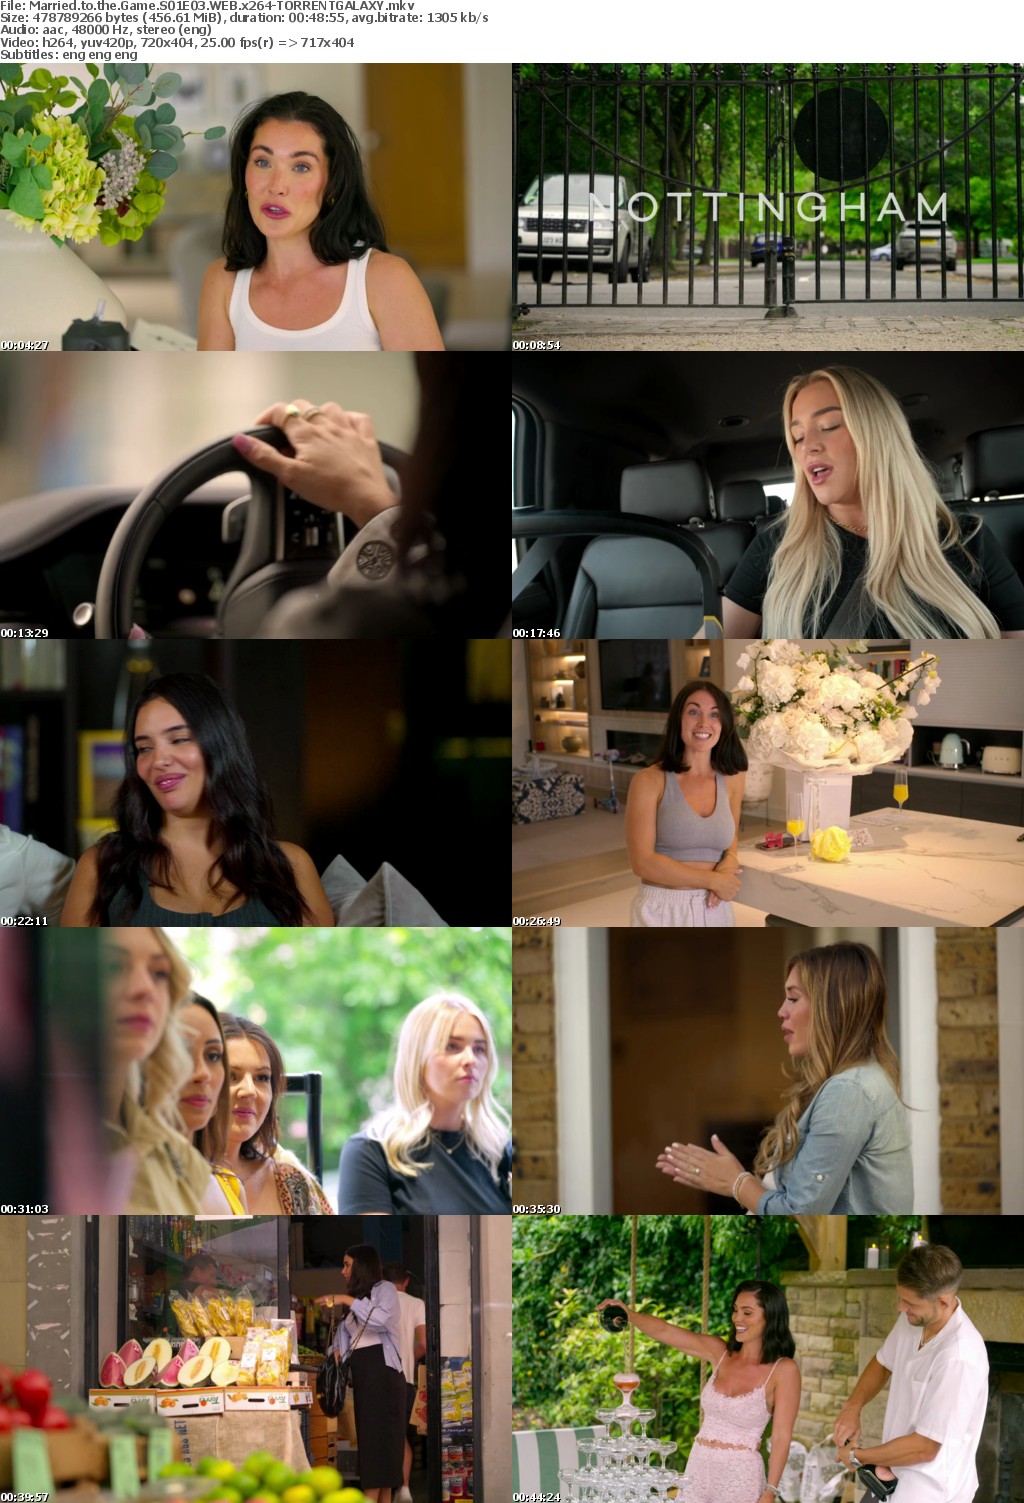 Married to the Game S01E03 WEB x264-GALAXY